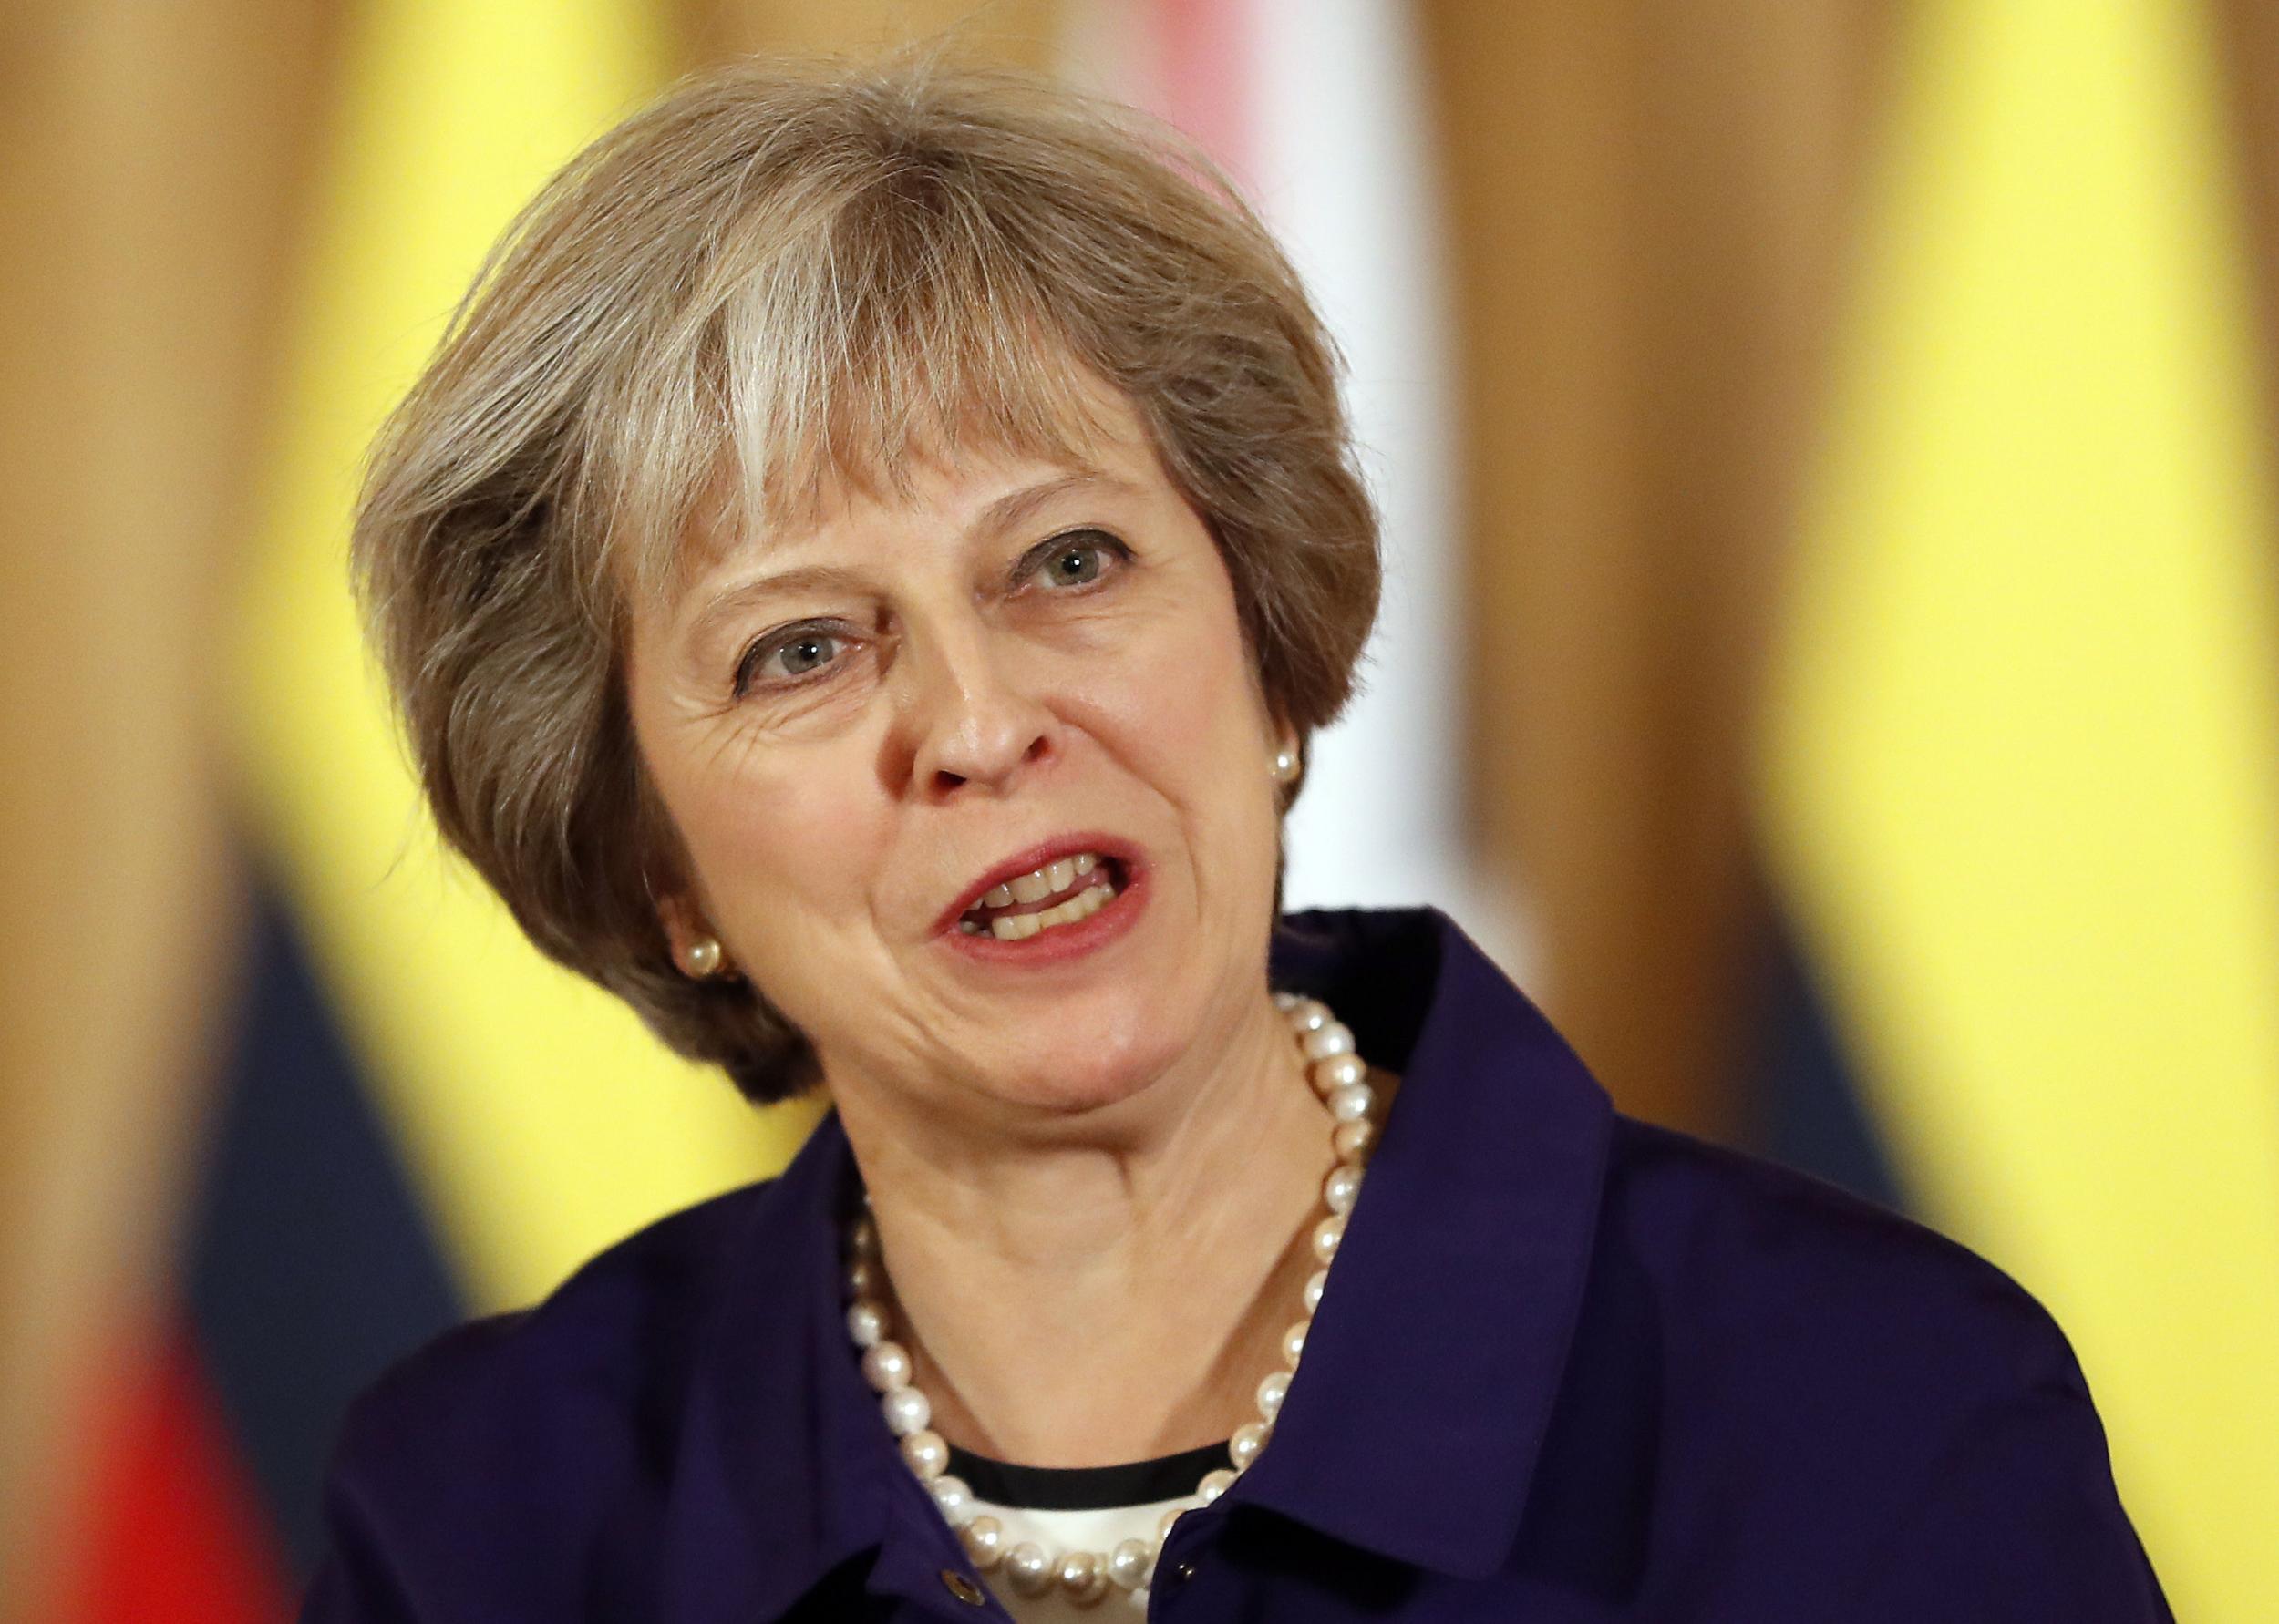 The PM will visit India this week for her first bilateral trip outside the EU